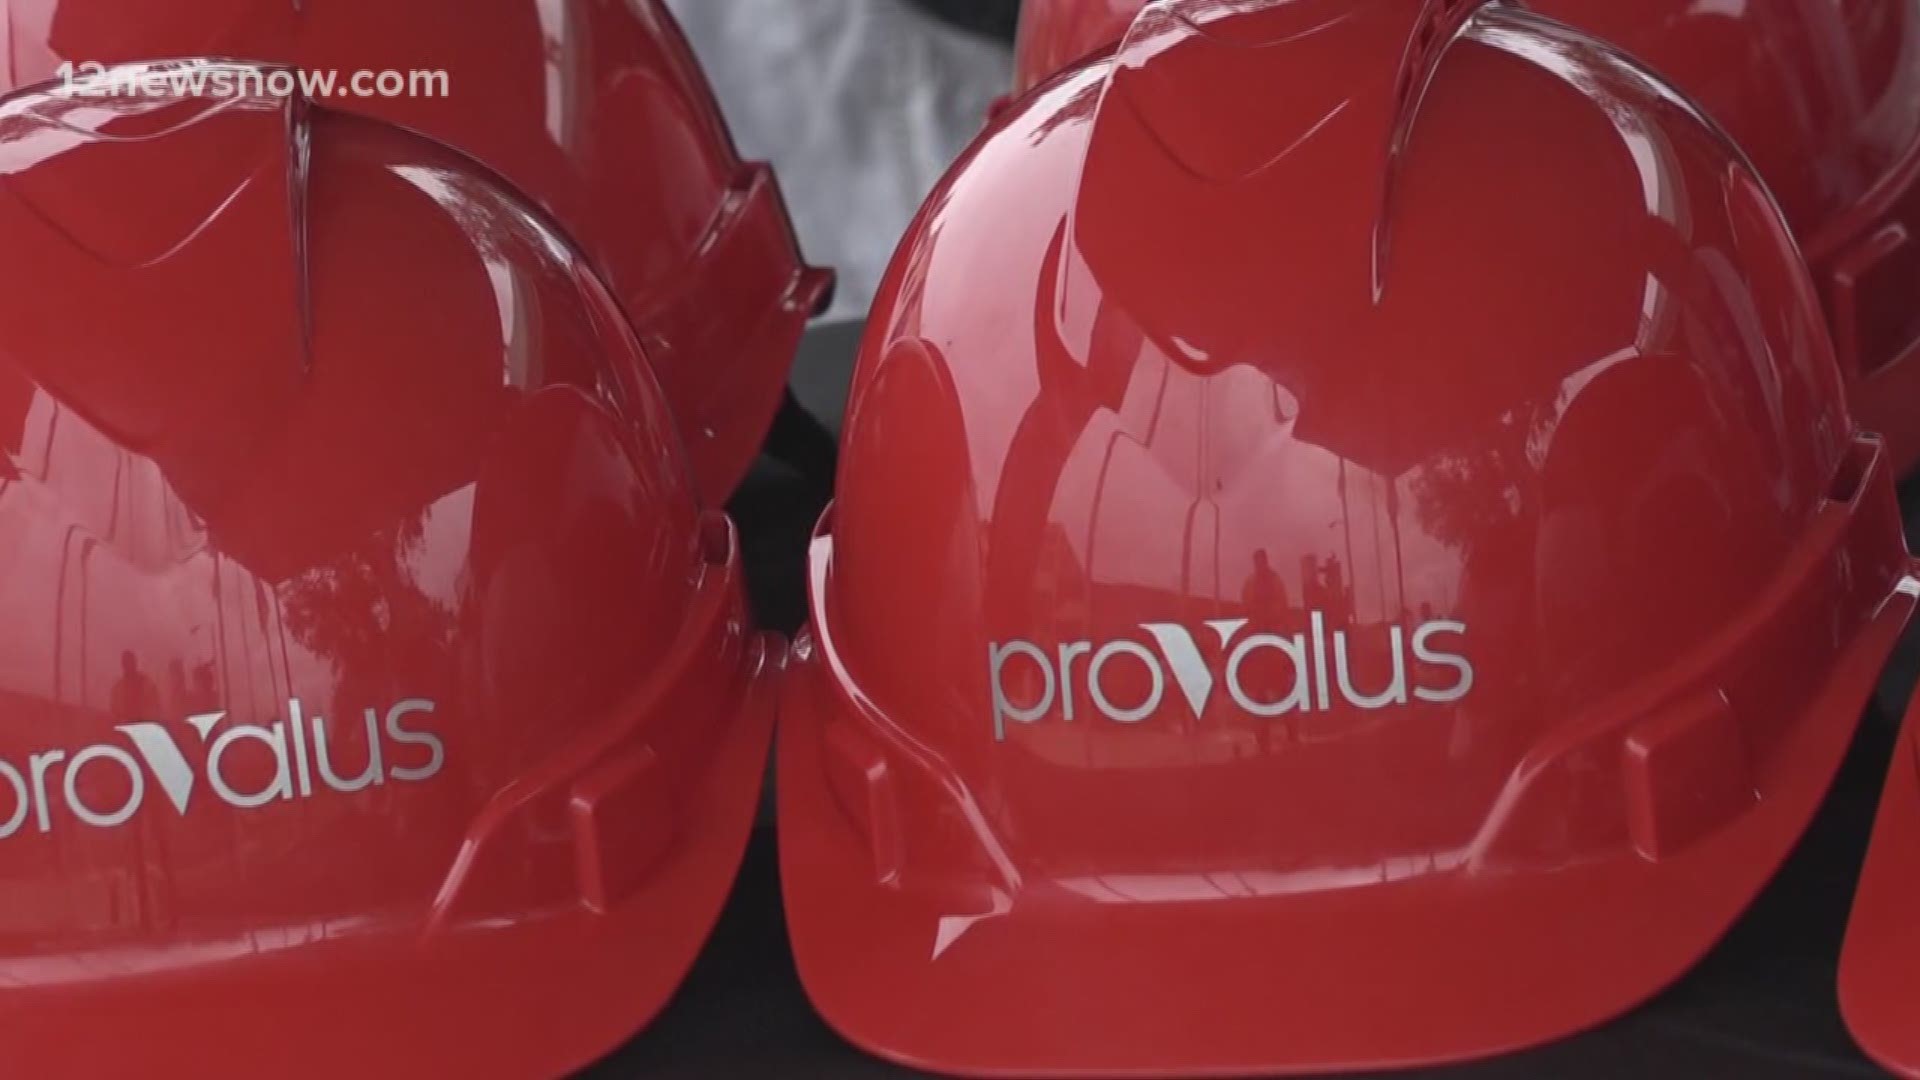 The technology company, Provalus, opened a new location and is expected to bring more jobs to the city of Jasper, TX.